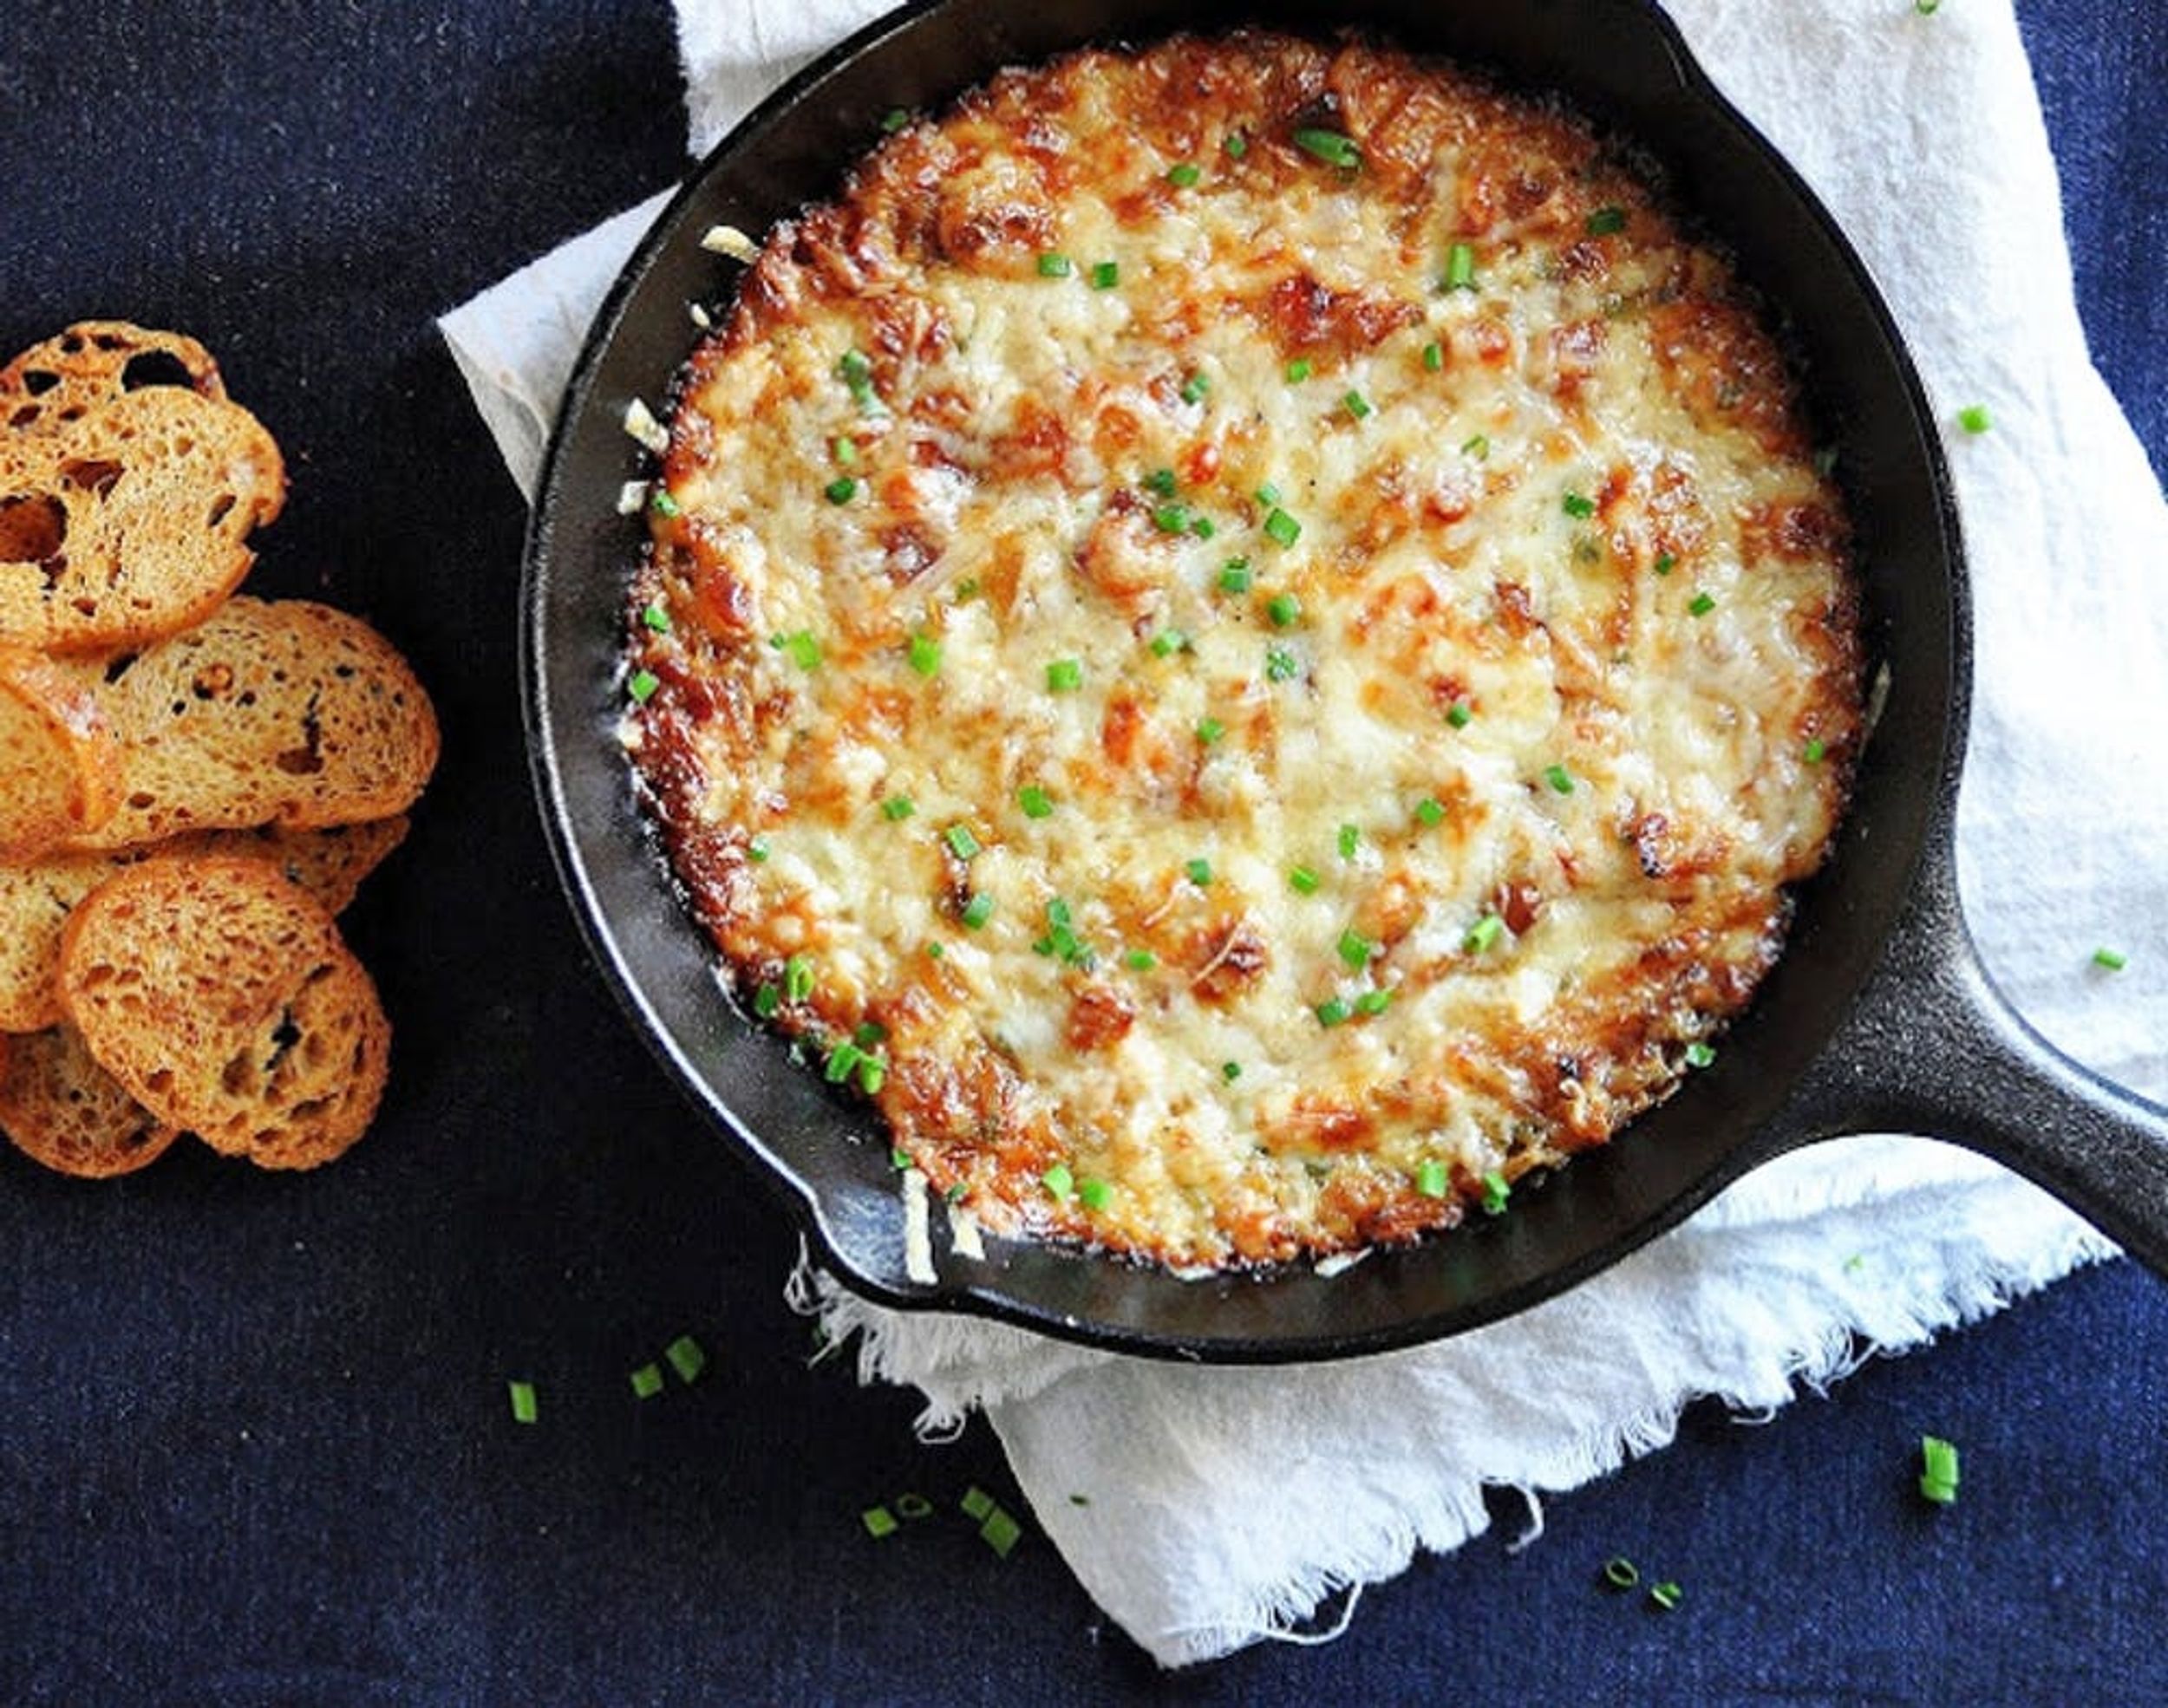 12 Gruyère Recipes to Make This Week